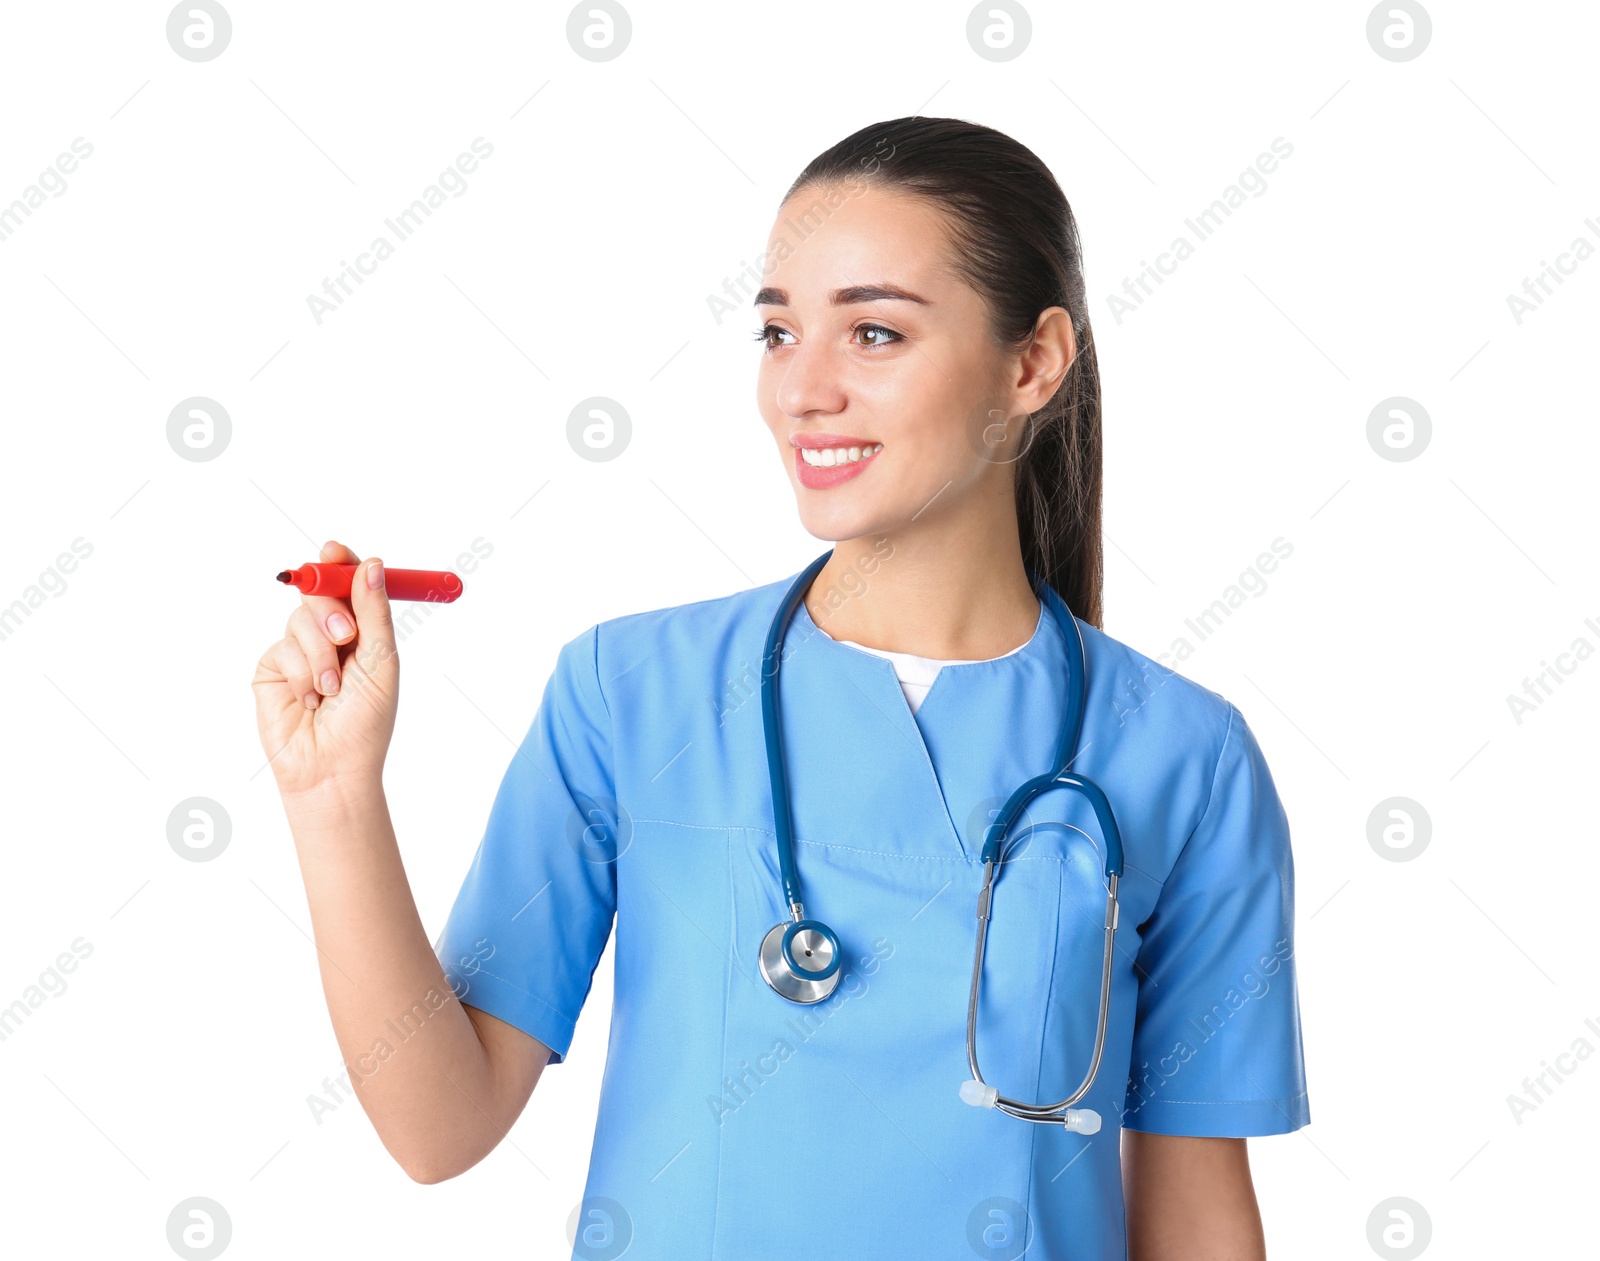 Photo of Medical student with marker on white background